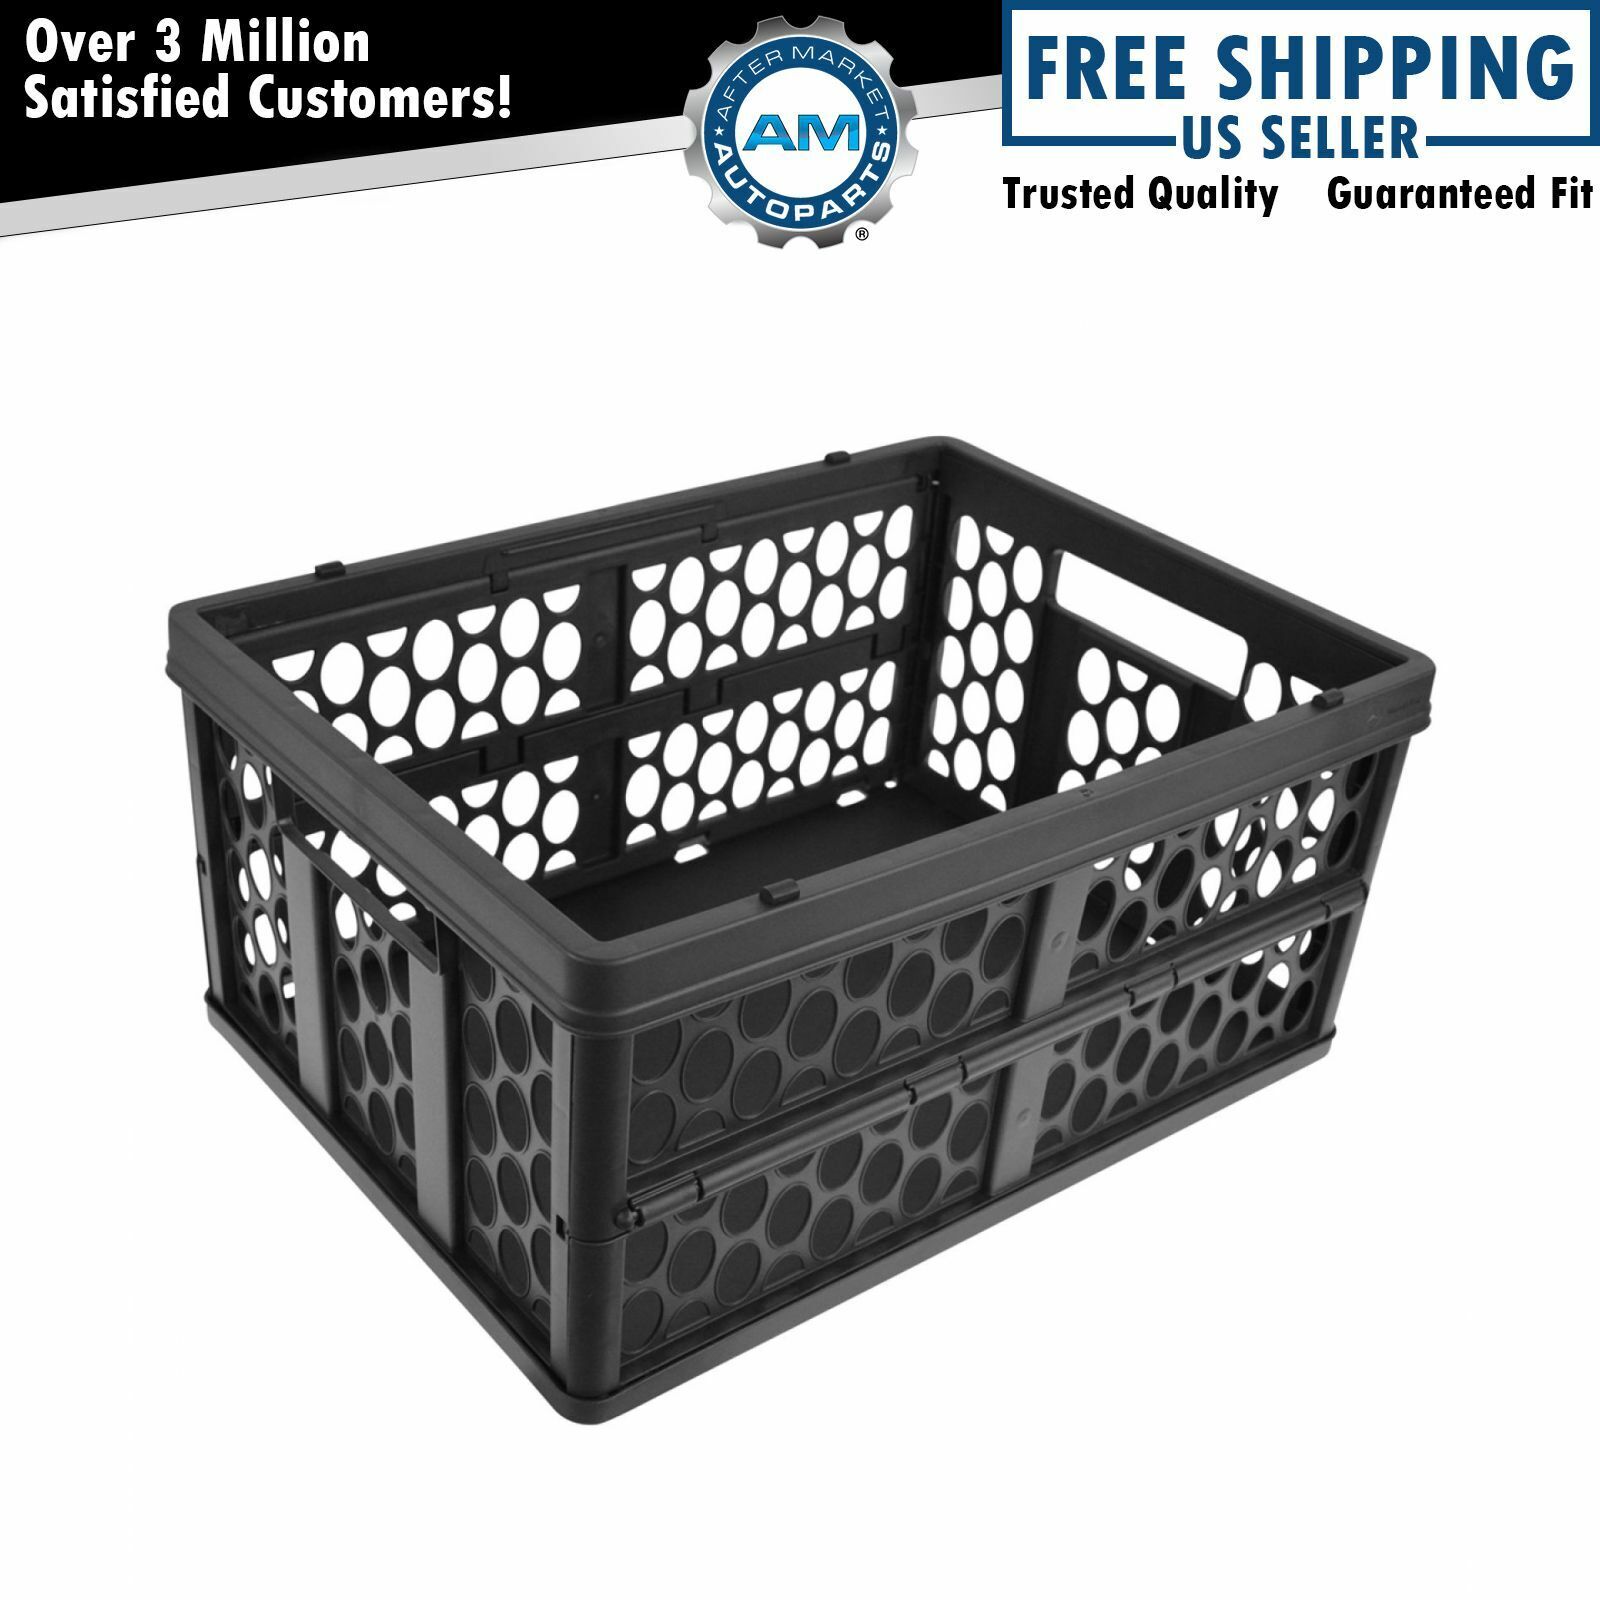 OEM 20384000 Collapsible Storage Bin Crate Basket Cargo Mount for Mercedes Benz